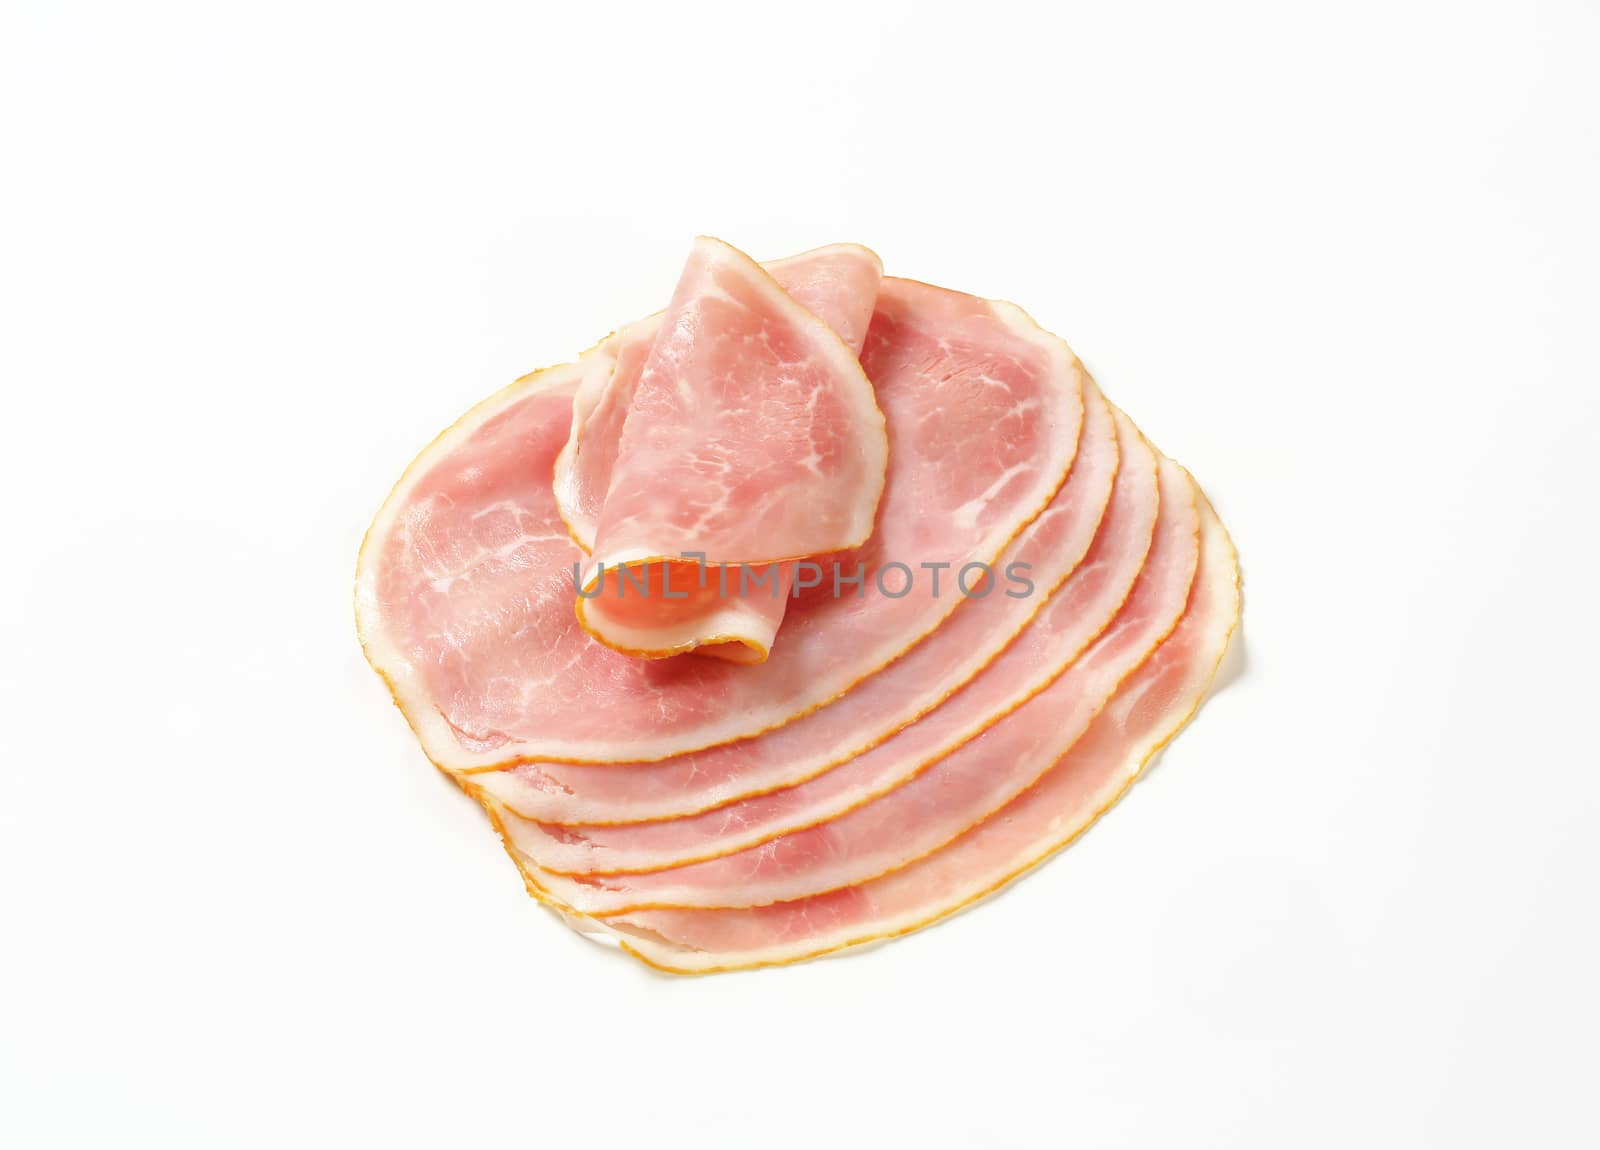 Thin slices of cooked ham on white background